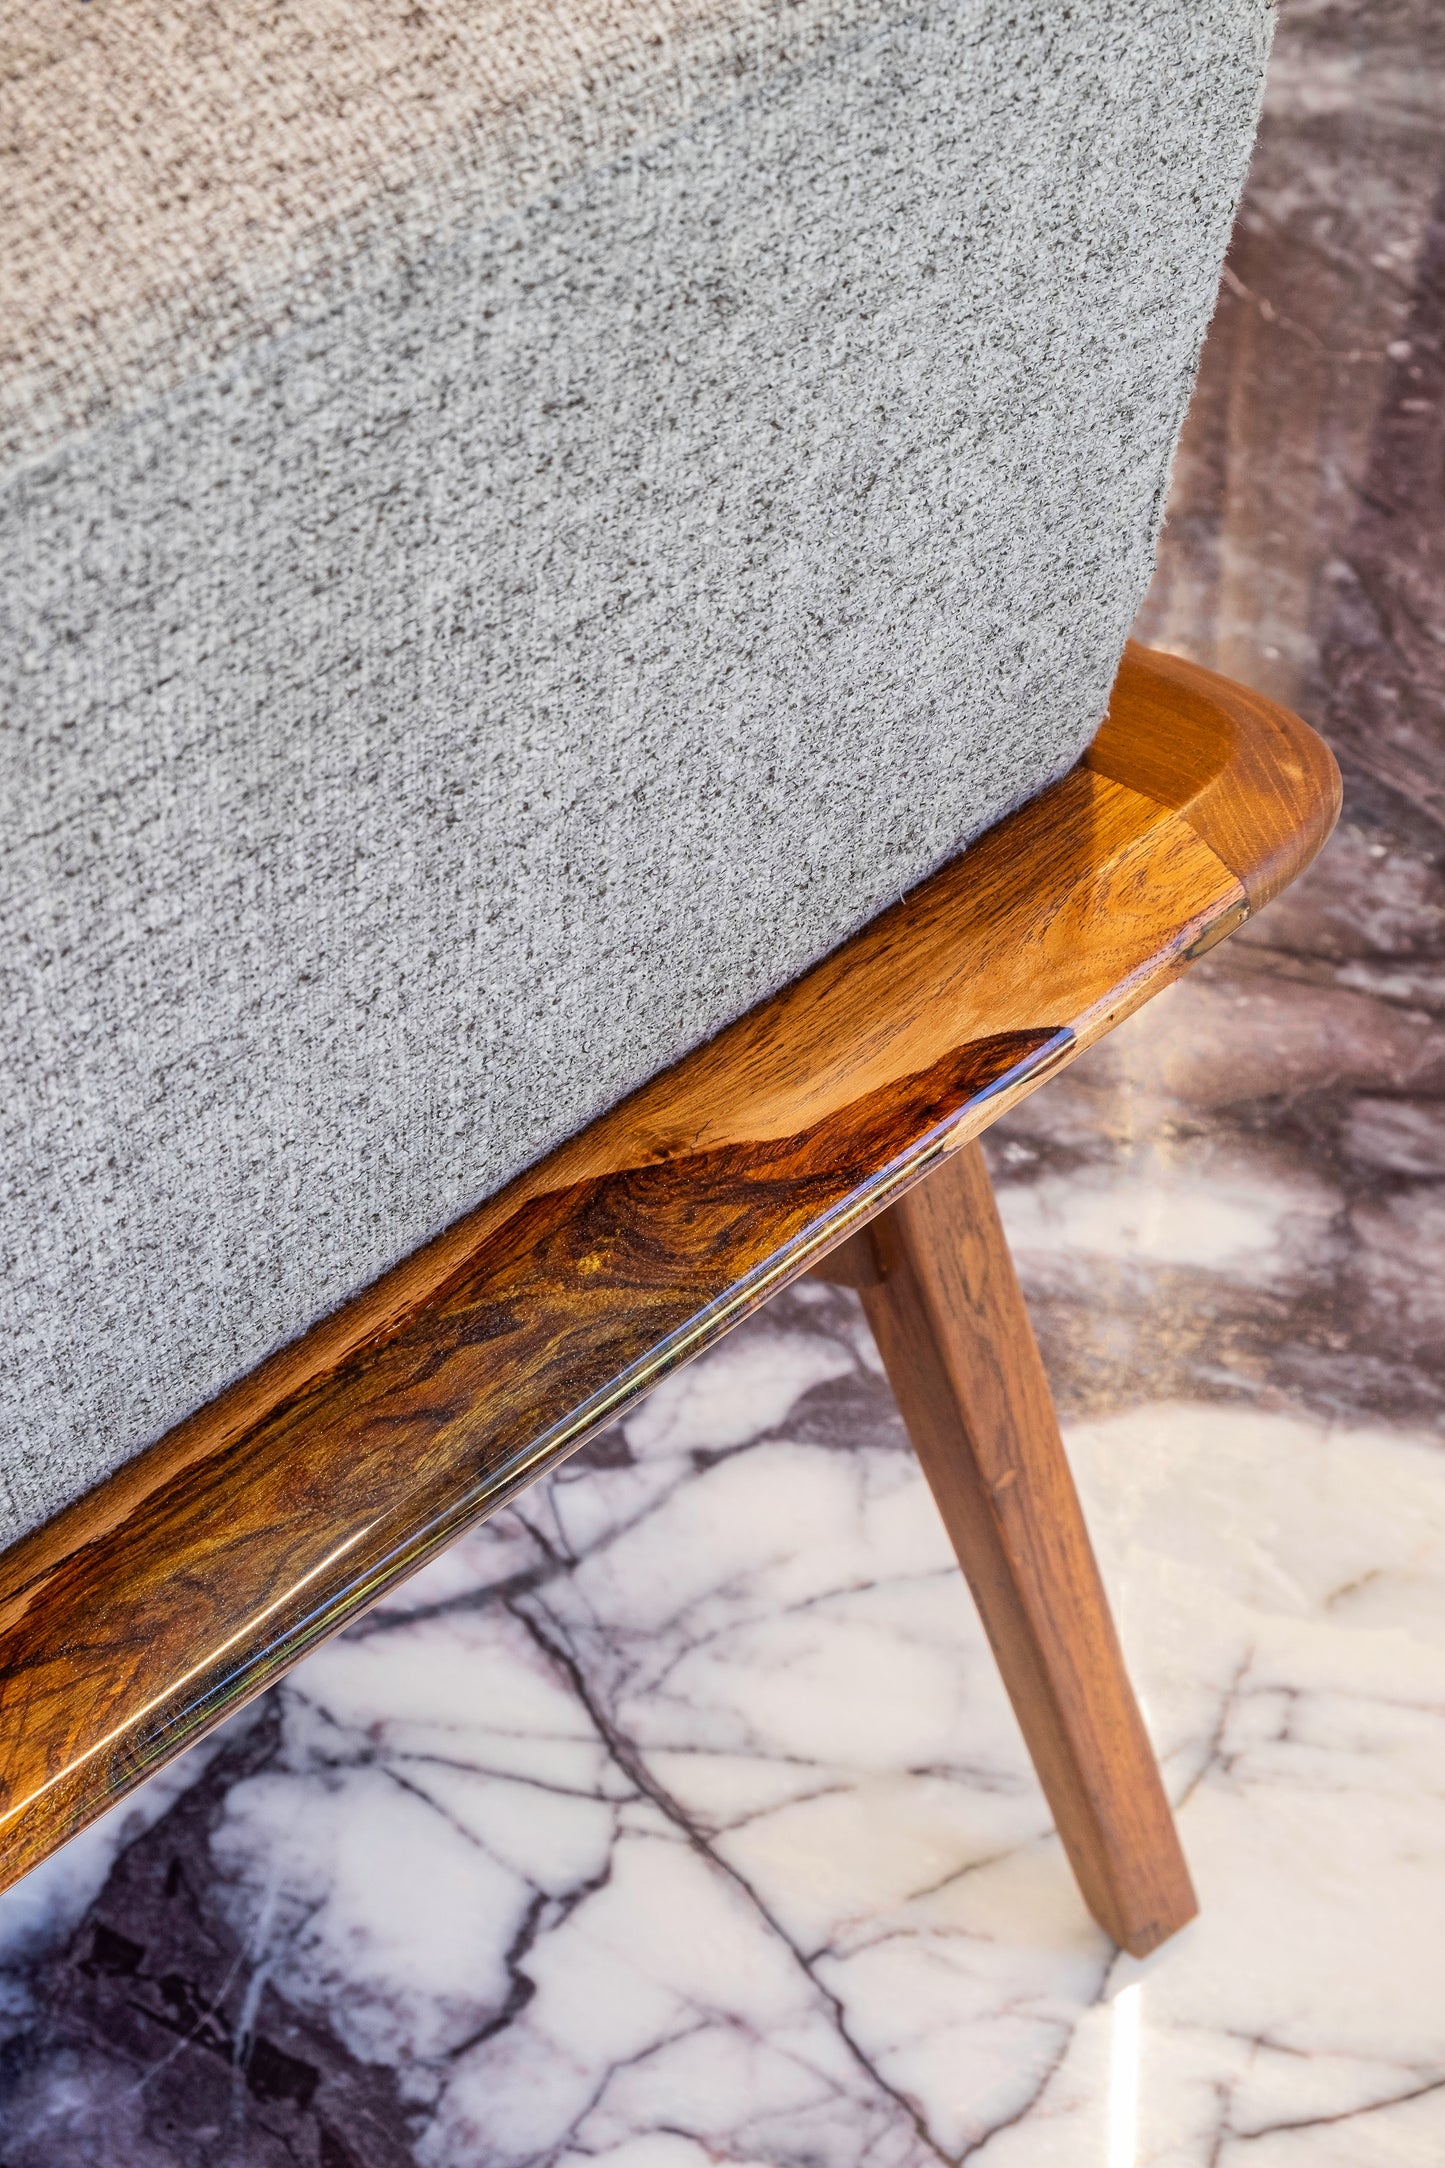 The Umang Dining Chair with Resin Fusion